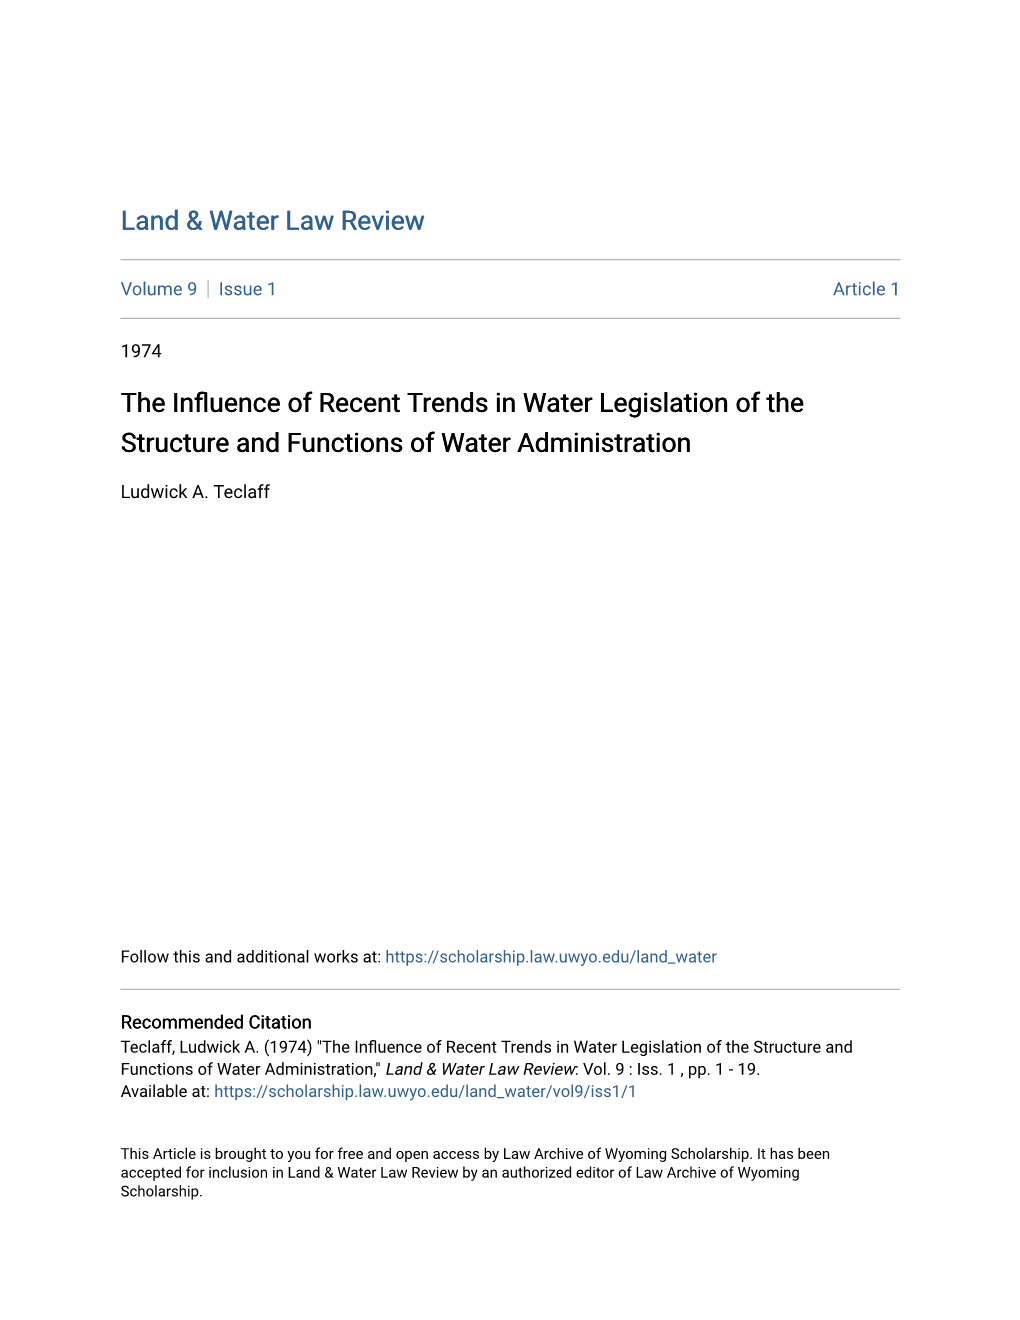 The Influence of Recent Trends in Water Legislation of the Structure and Functions of Water Administration